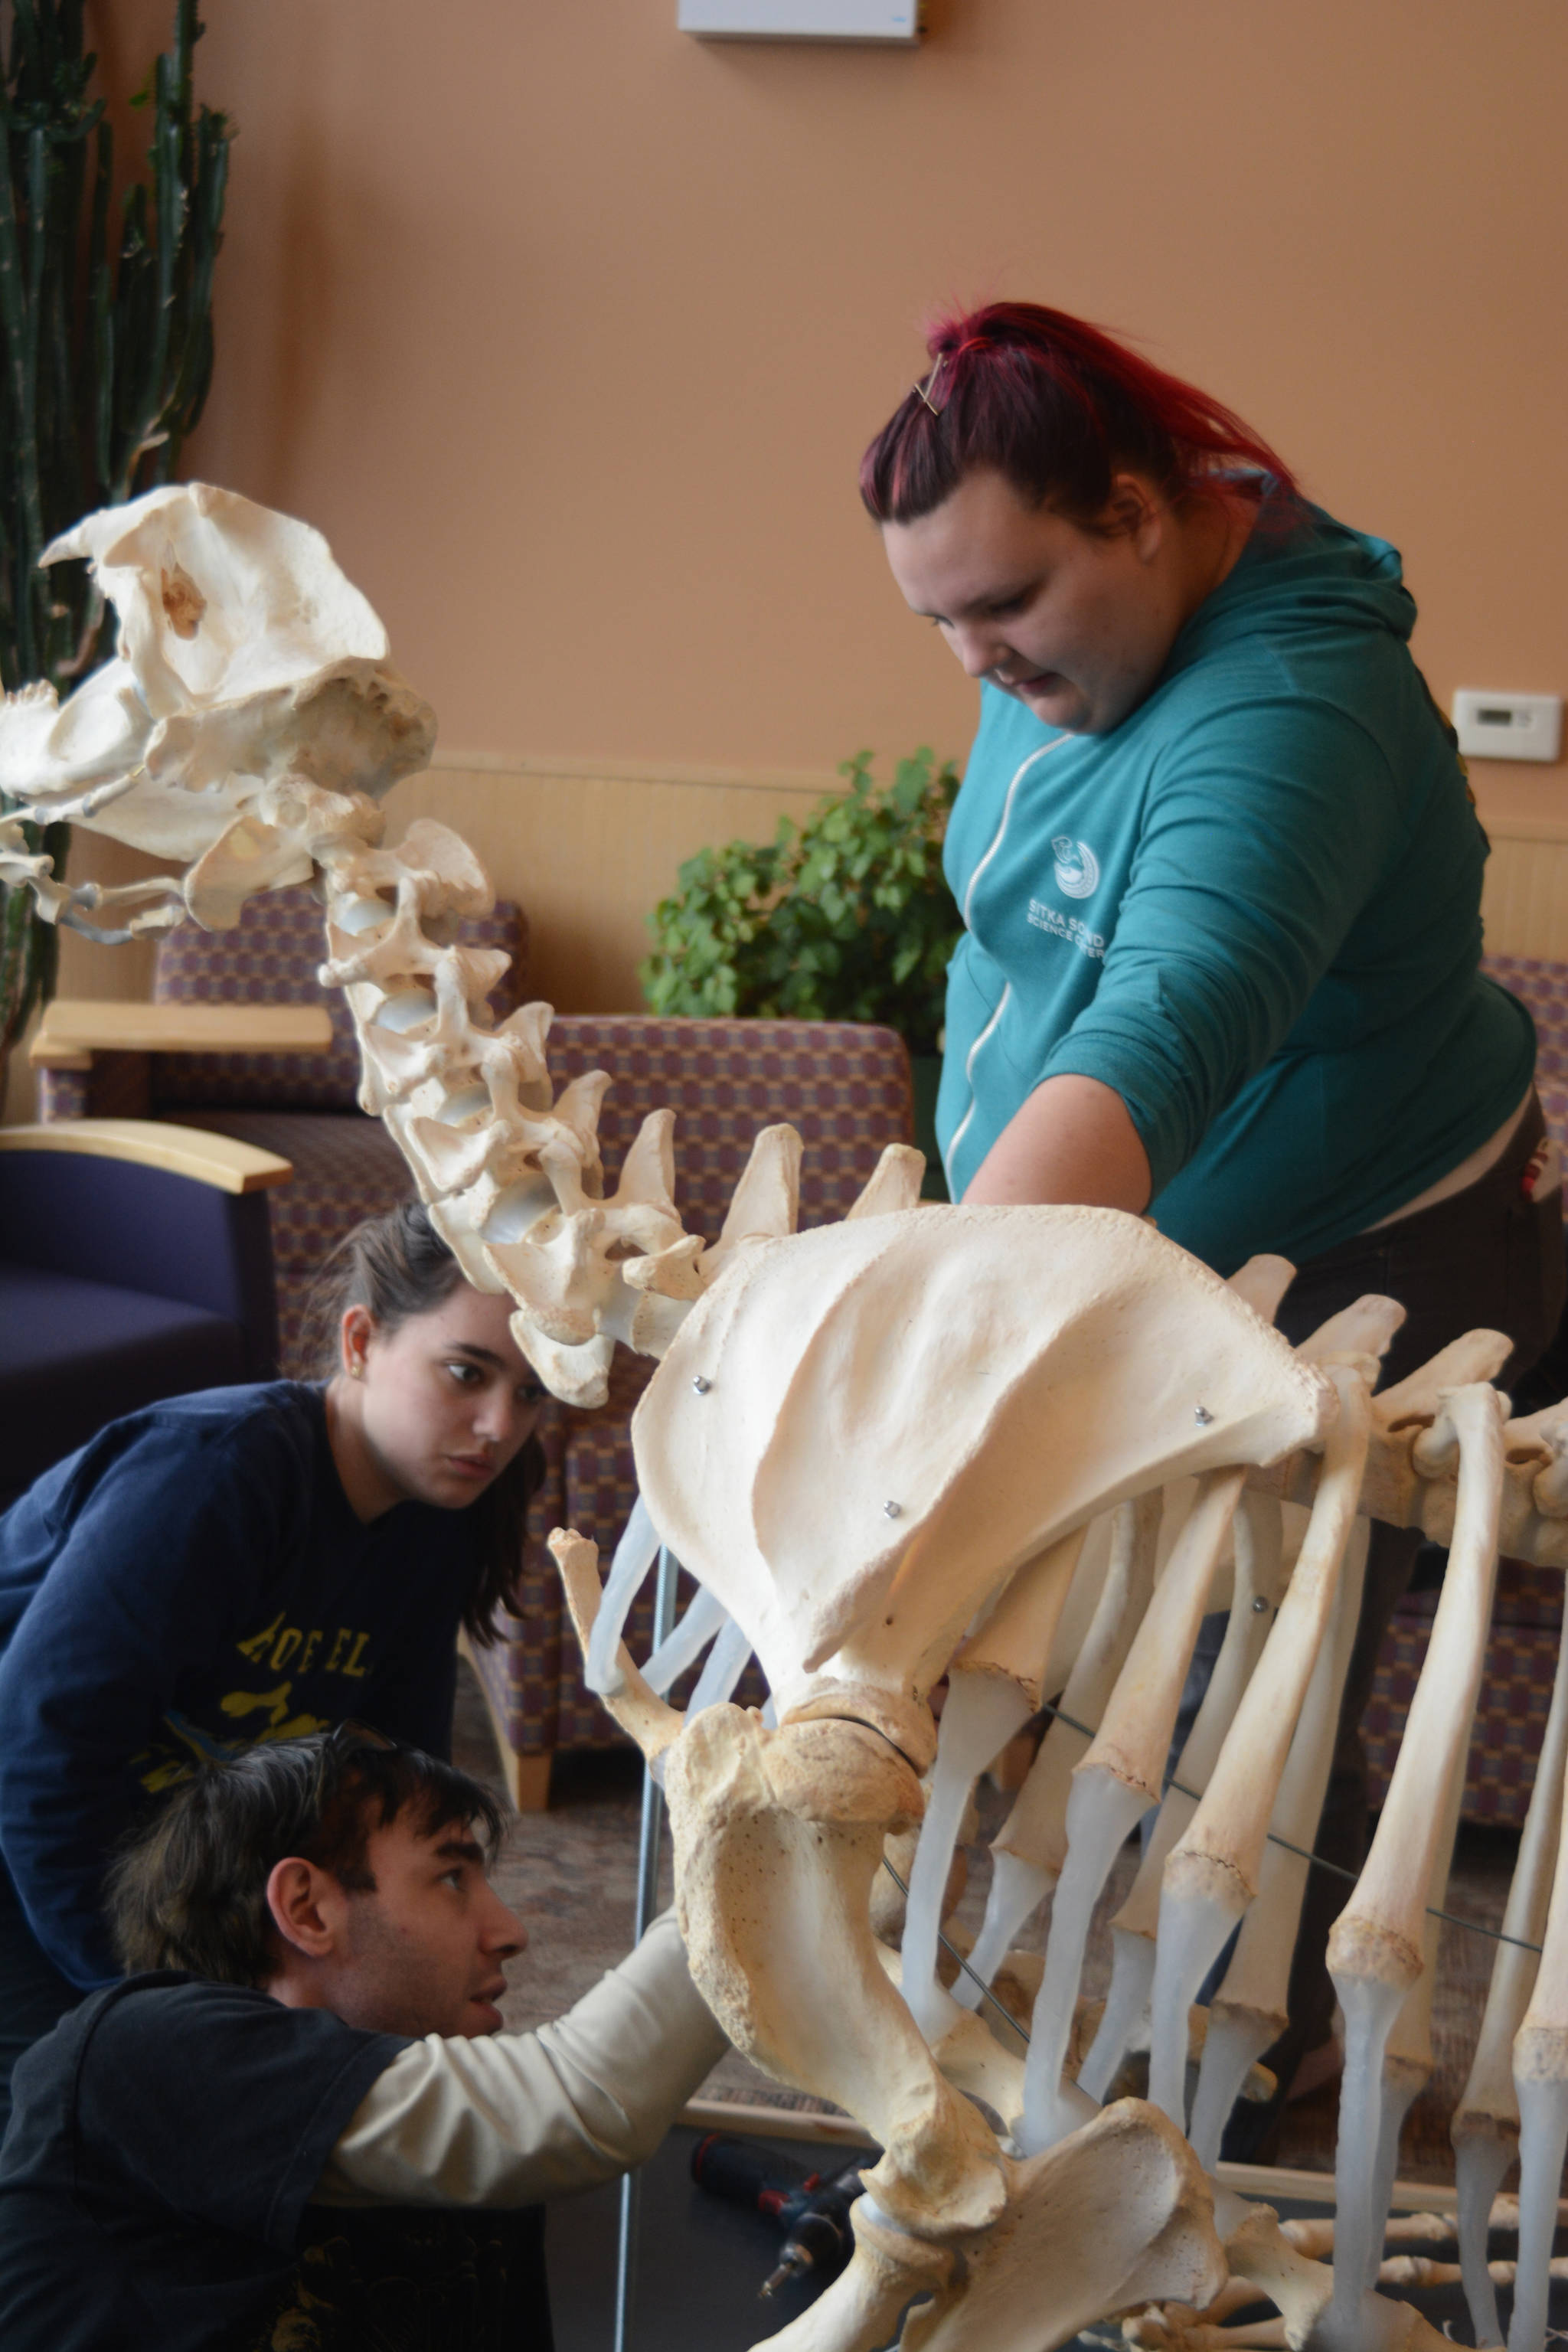 Zobeida Rutkin, right, helps Nicole Webster, left, and Kyle Cullum, center, assembly the skeleton of a sea lion, Woody, Wednesday, Nov. 22, 2017 in Pioneer Hall of Kachemak Bay Campus in Homer, Alaska. The students helped articulate Woody’s skeleton in Lee Post’s Marine Skeleton Articulation class. (Photo by Michael Armstrong, Homer News)